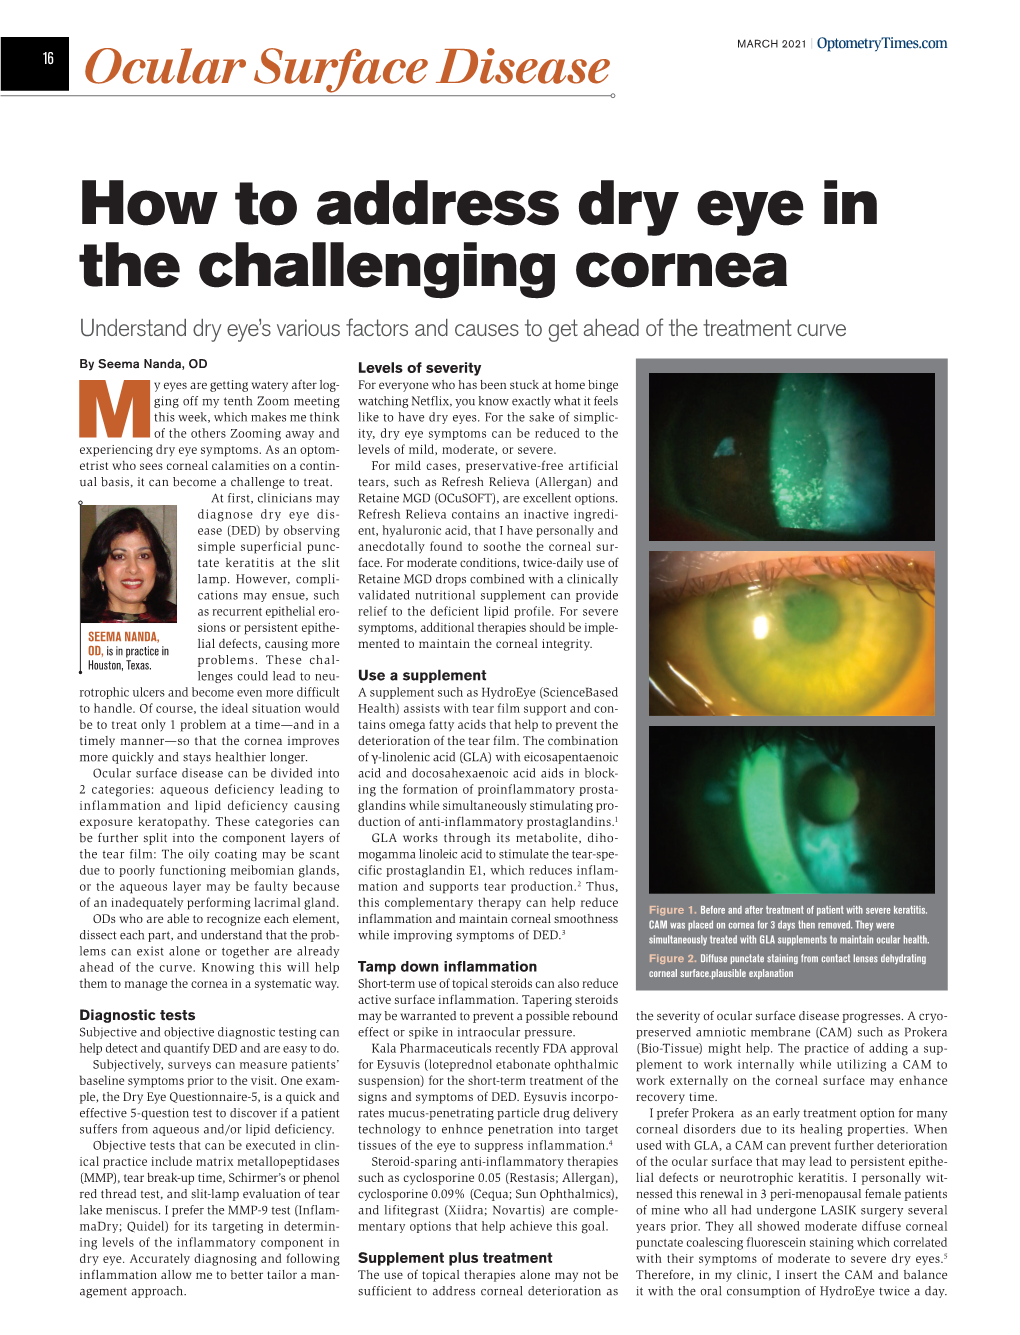 How to Address Dry Eye in the Challenging Cornea Understand Dry Eye’S Various Factors and Causes to Get Ahead of the Treatment Curve